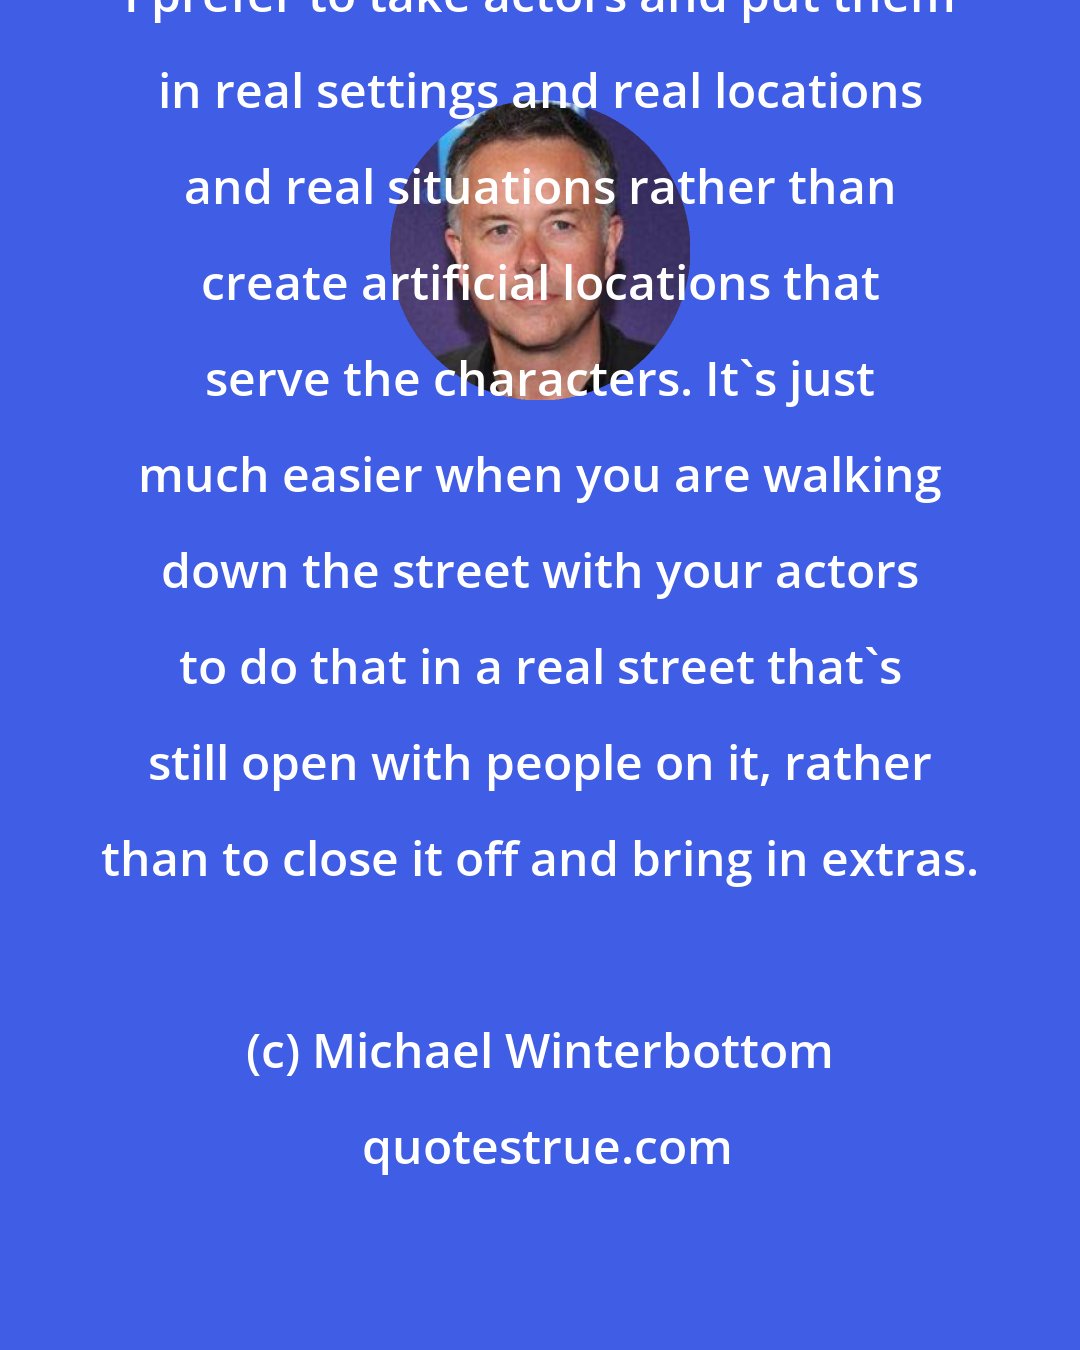 Michael Winterbottom: I prefer to take actors and put them in real settings and real locations and real situations rather than create artificial locations that serve the characters. It's just much easier when you are walking down the street with your actors to do that in a real street that's still open with people on it, rather than to close it off and bring in extras.